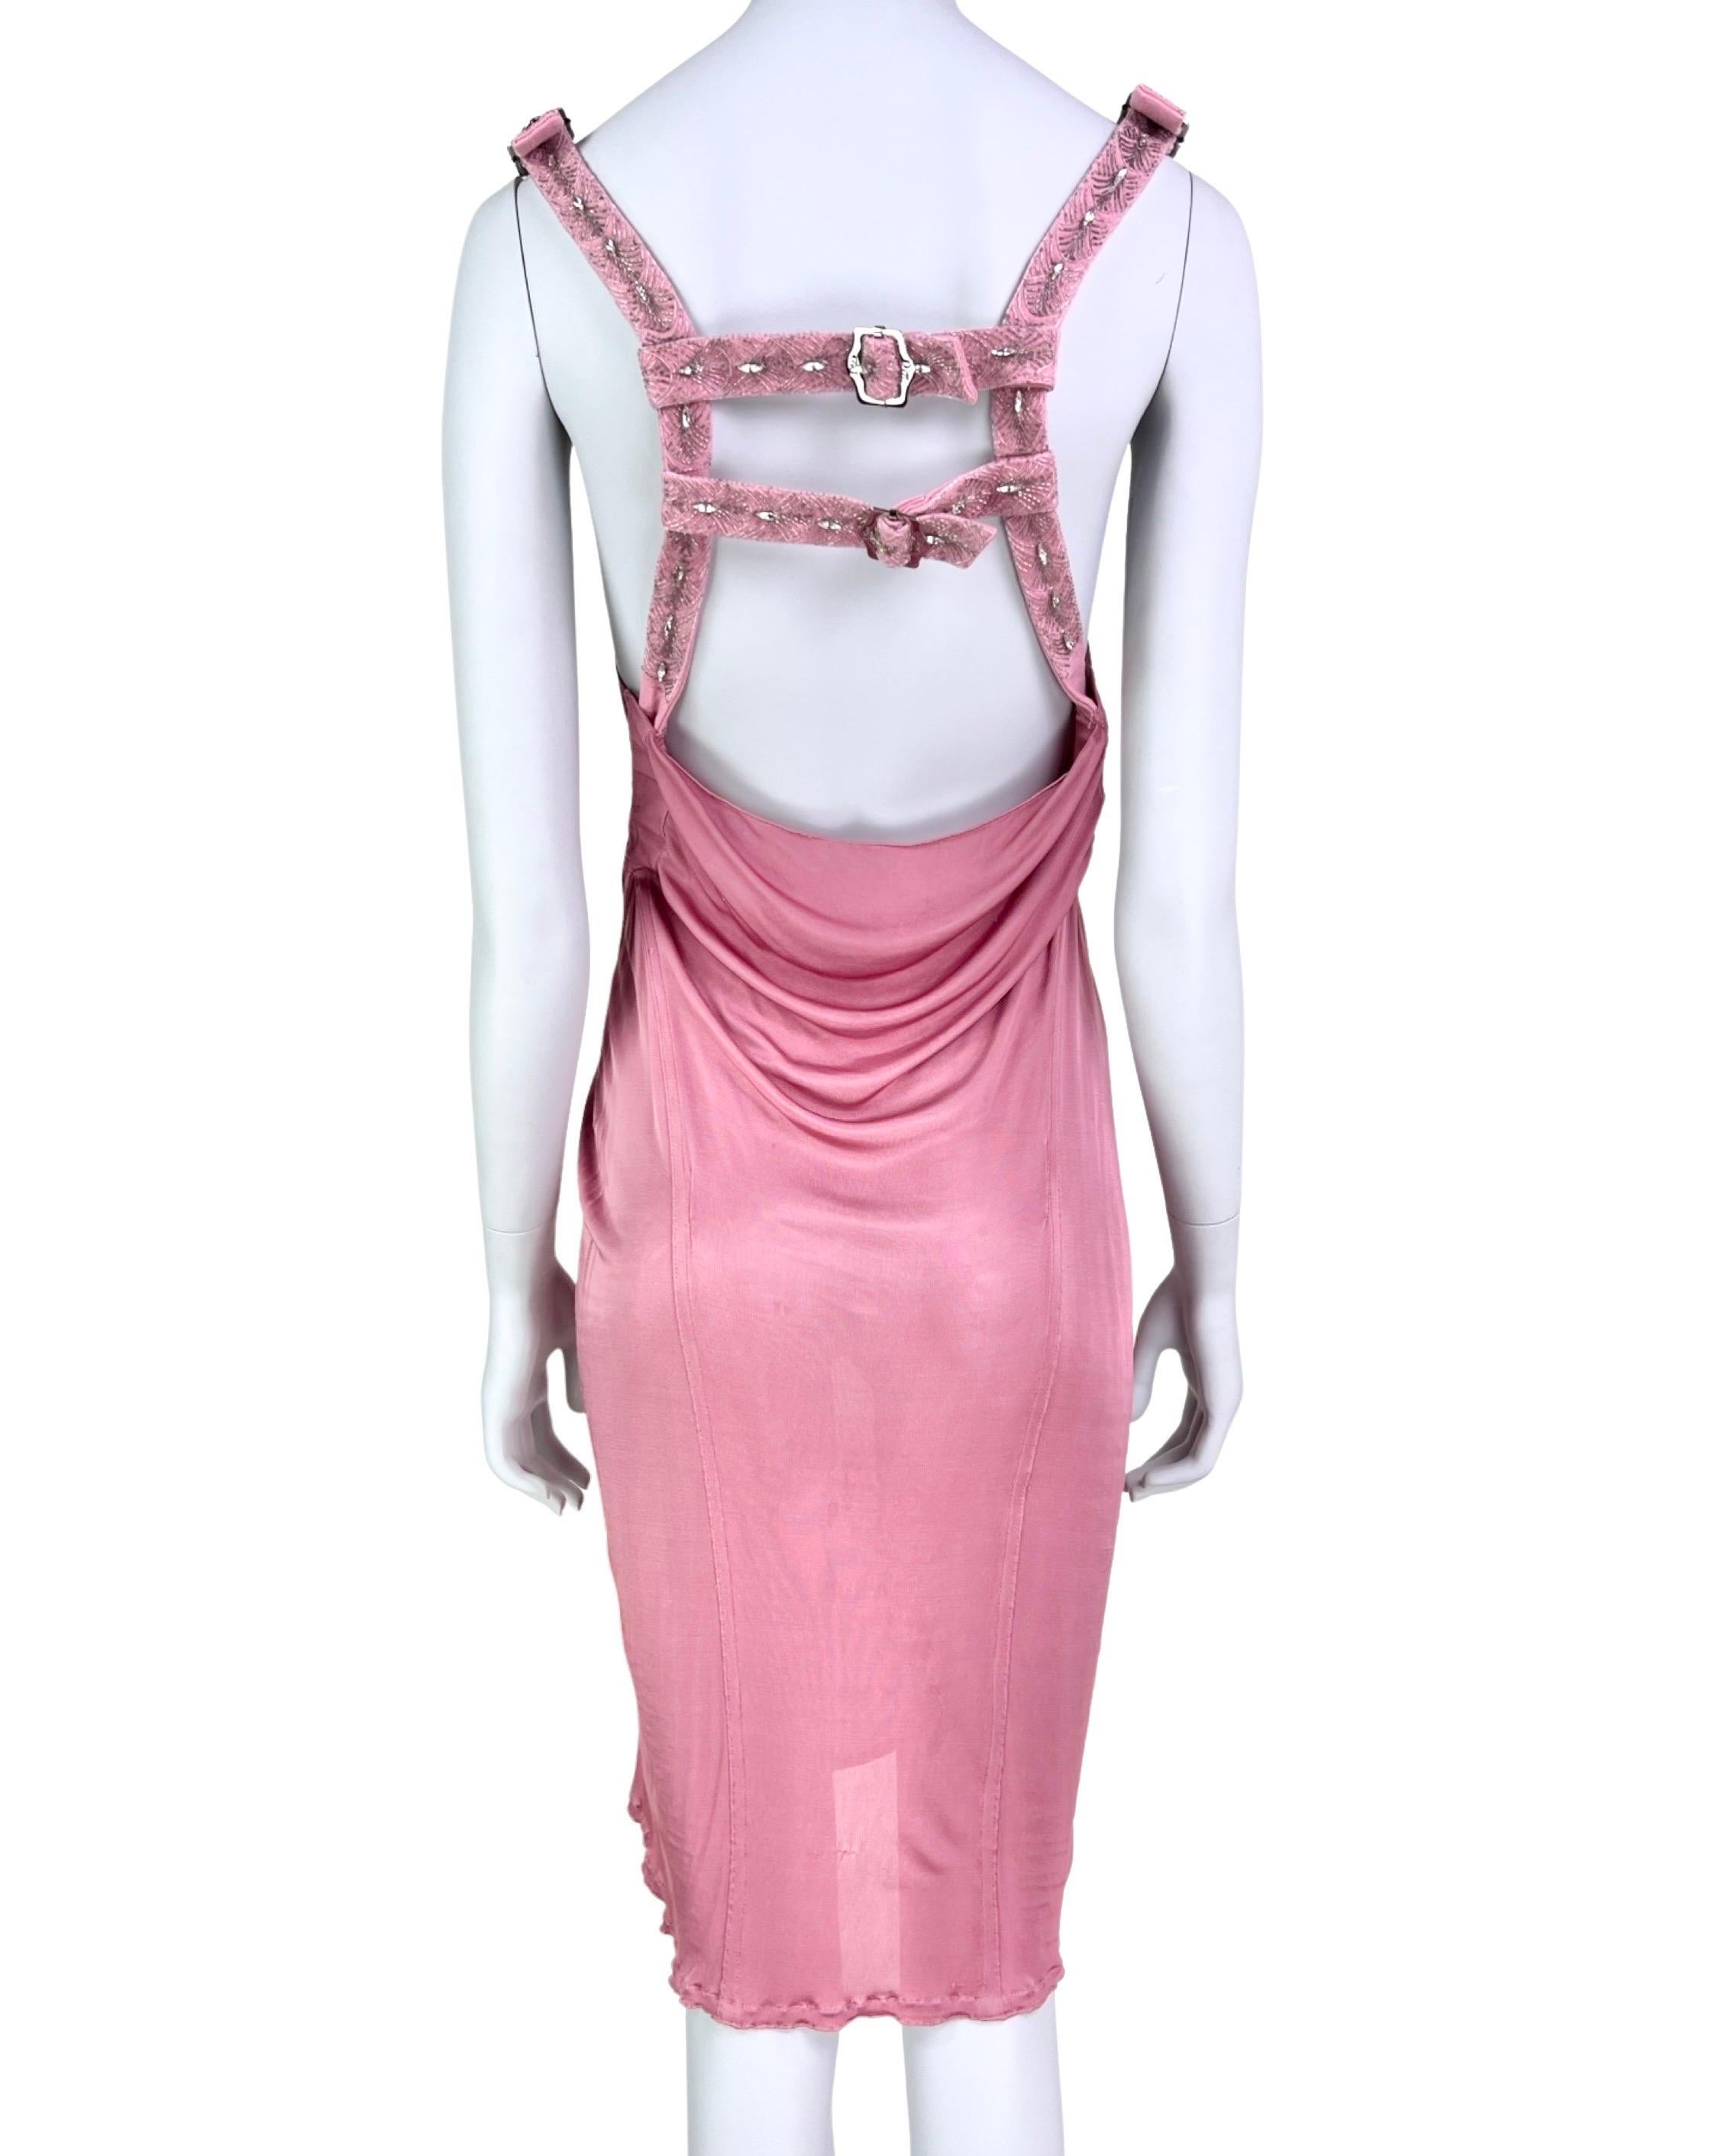 Dior by John Galliano Fall 2003 Embellished Silk Dress For Sale 10